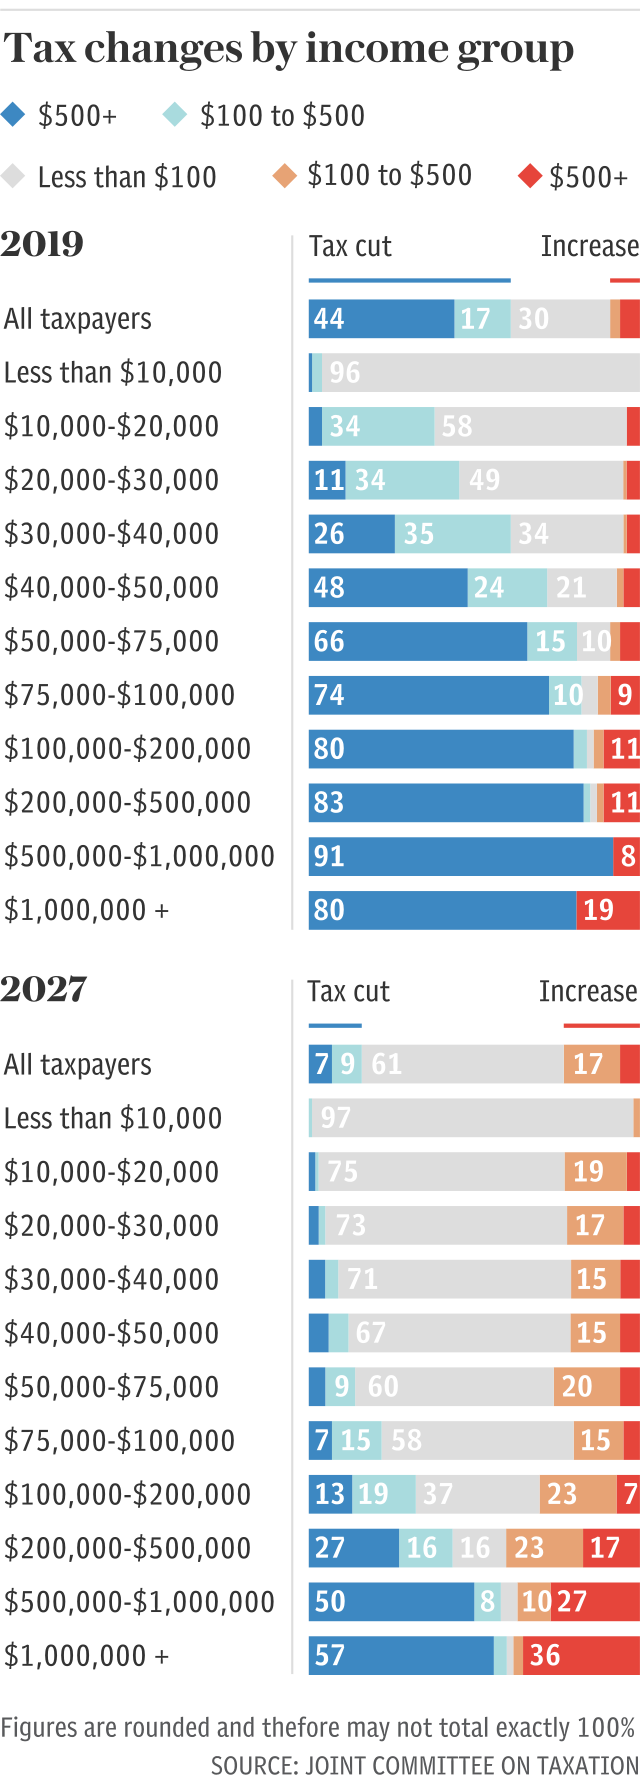 Tax changes by income